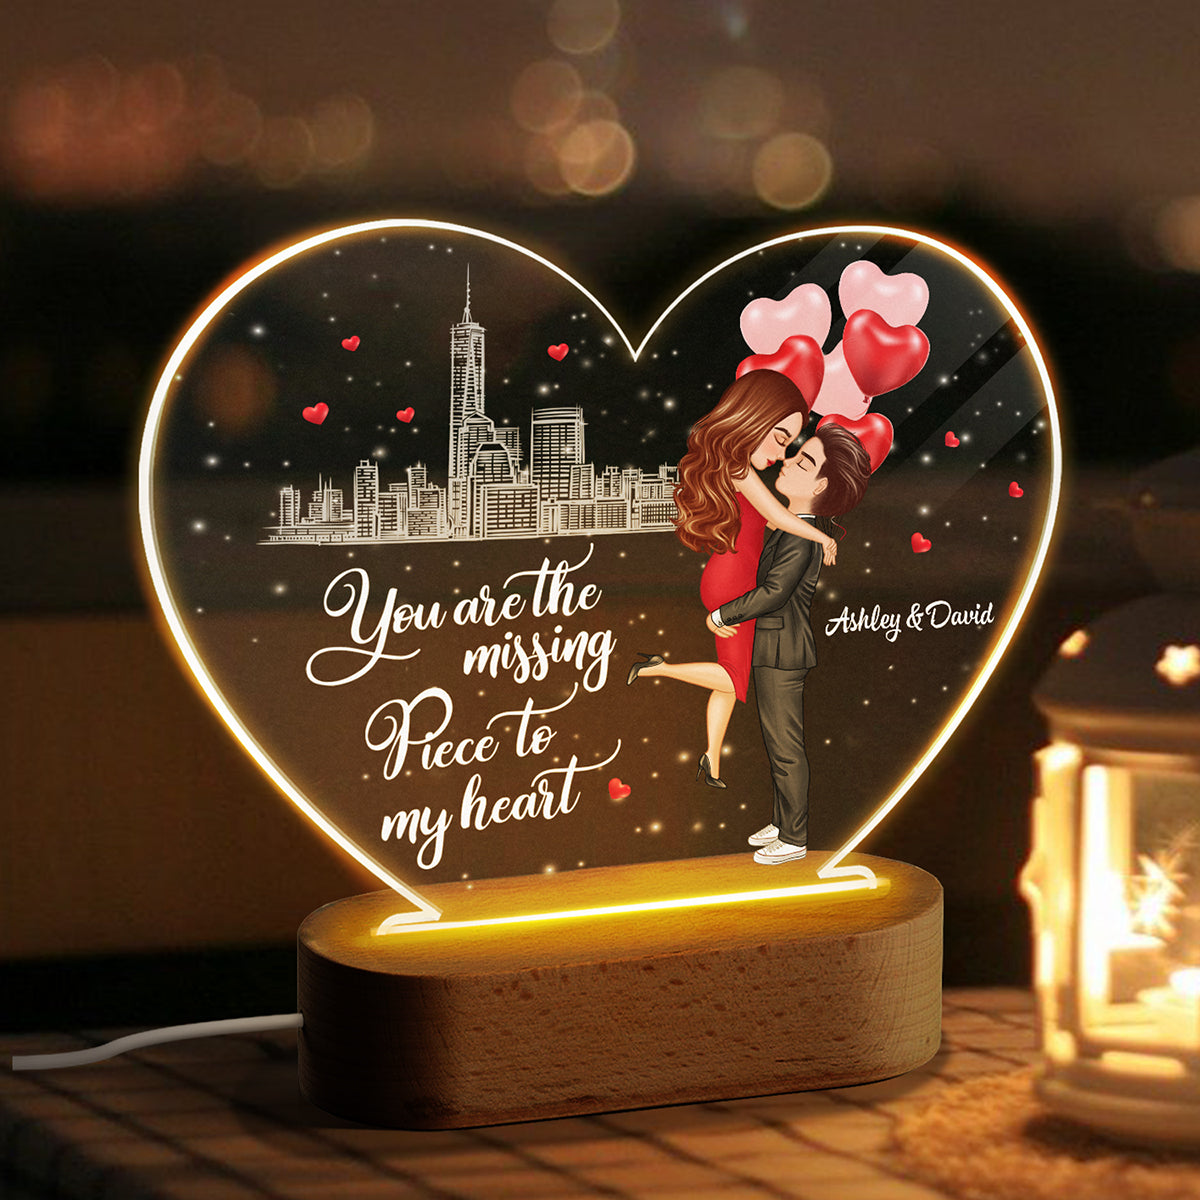 The Missing Piece To My Heart Personalized Heart Plaque LED Night Light - Acrylic LED Lamp - Valentine‘s Day Gift For Him, Gift For Her